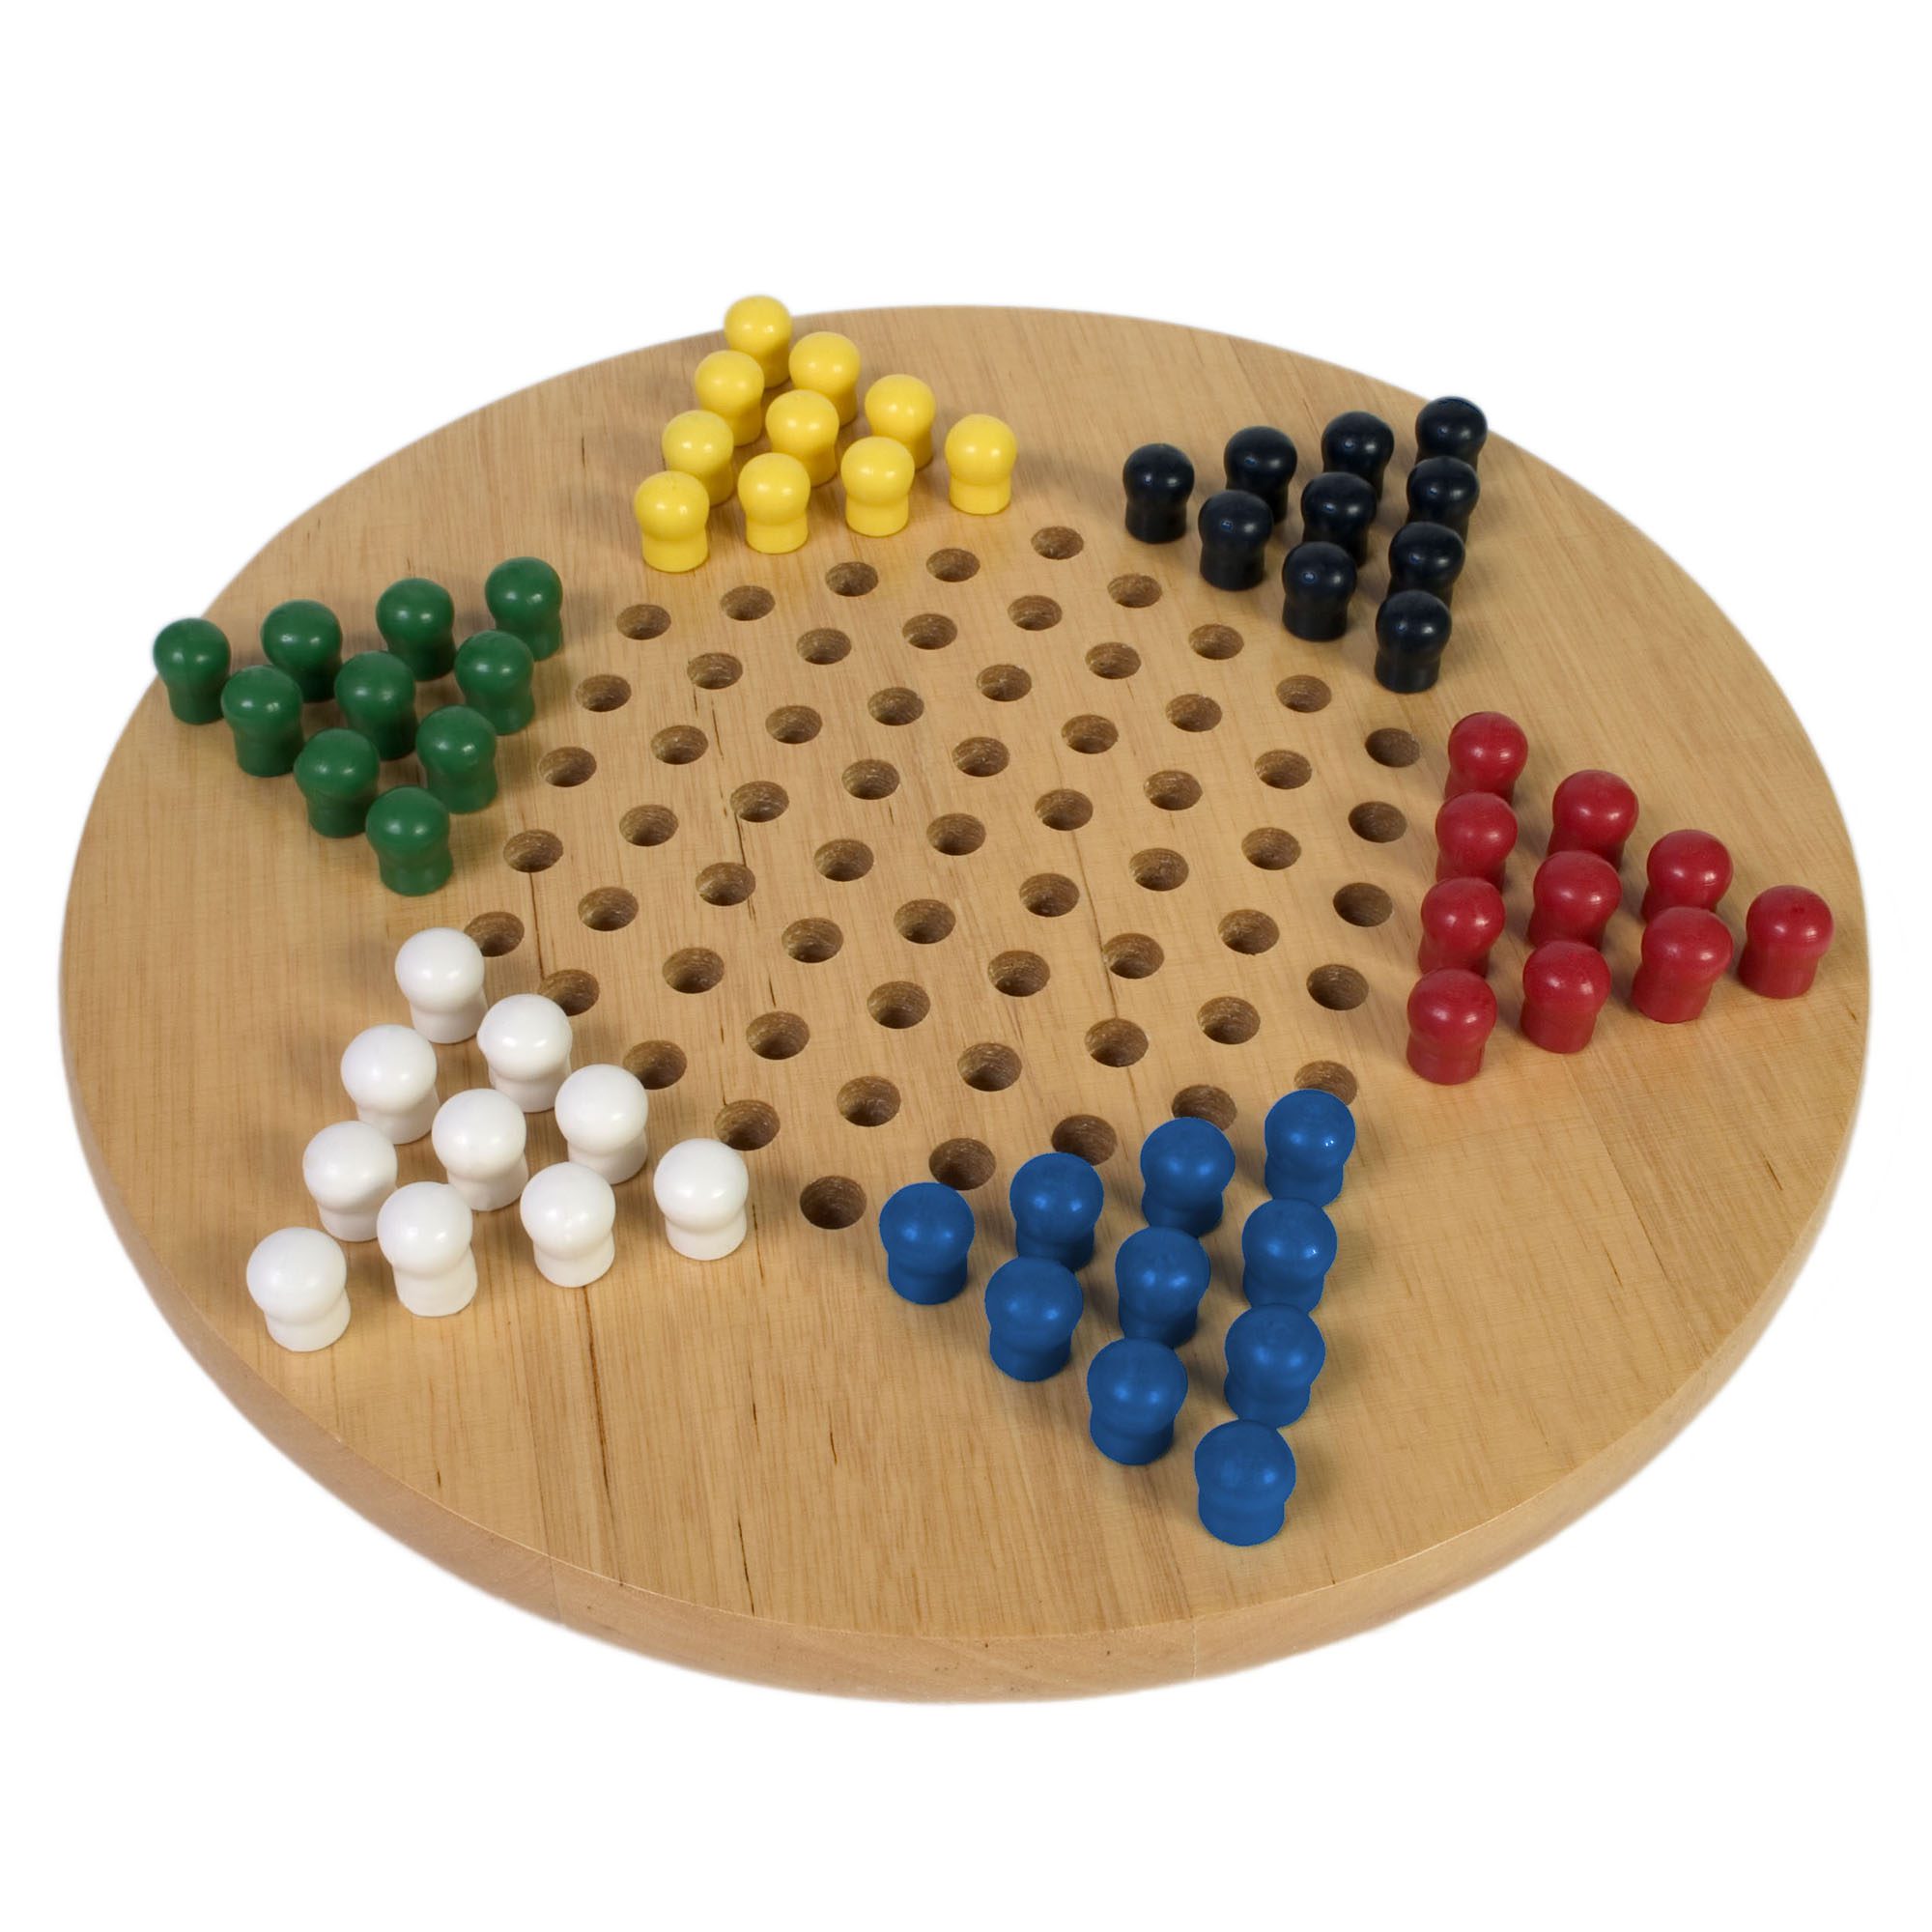 +or - GAME OR CHINESE CHECKER  MARBLES $10.99 SET OF 60 CHAMPION CLEARIE 9/16" 